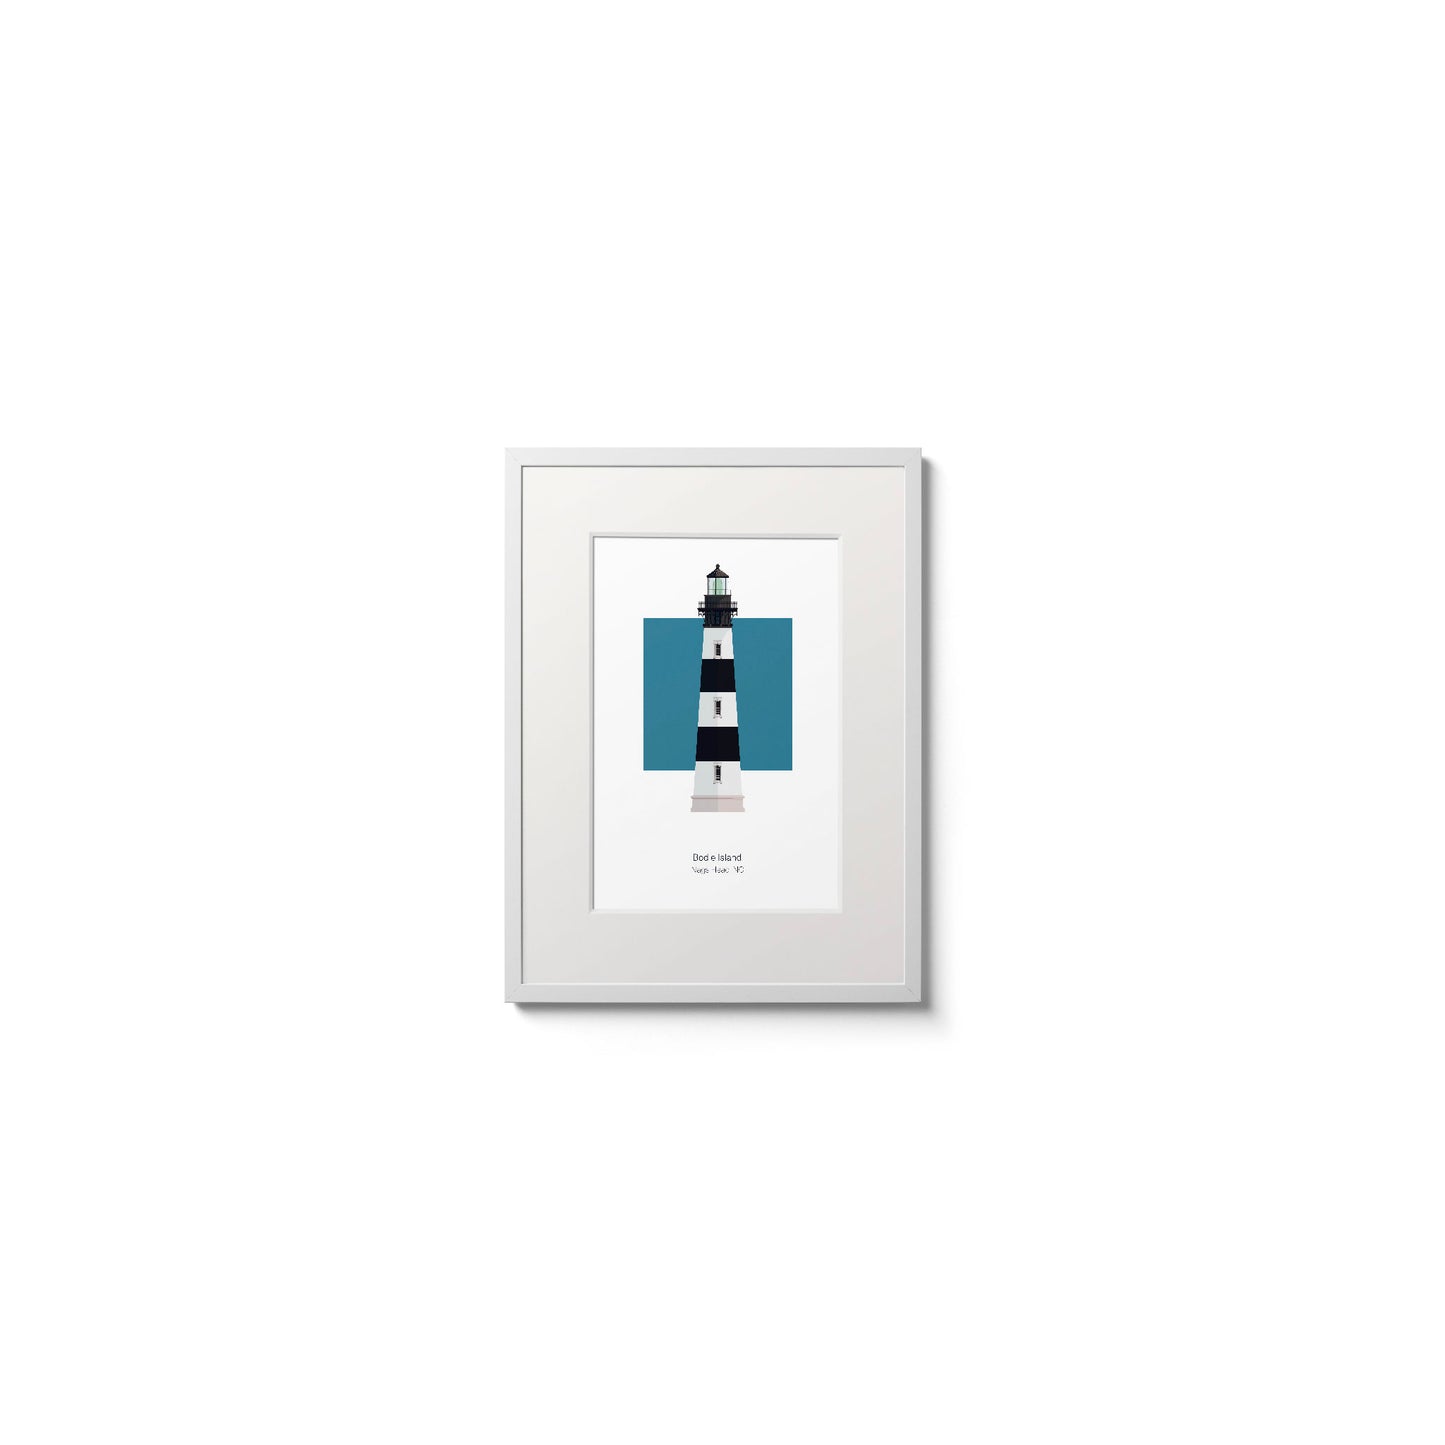 Illustration of the Bodie Island lighthouse, North Carolina, USA. On a white background with aqua blue square as a backdrop., in a white frame  and measuring 6"x8" (15x20cm).